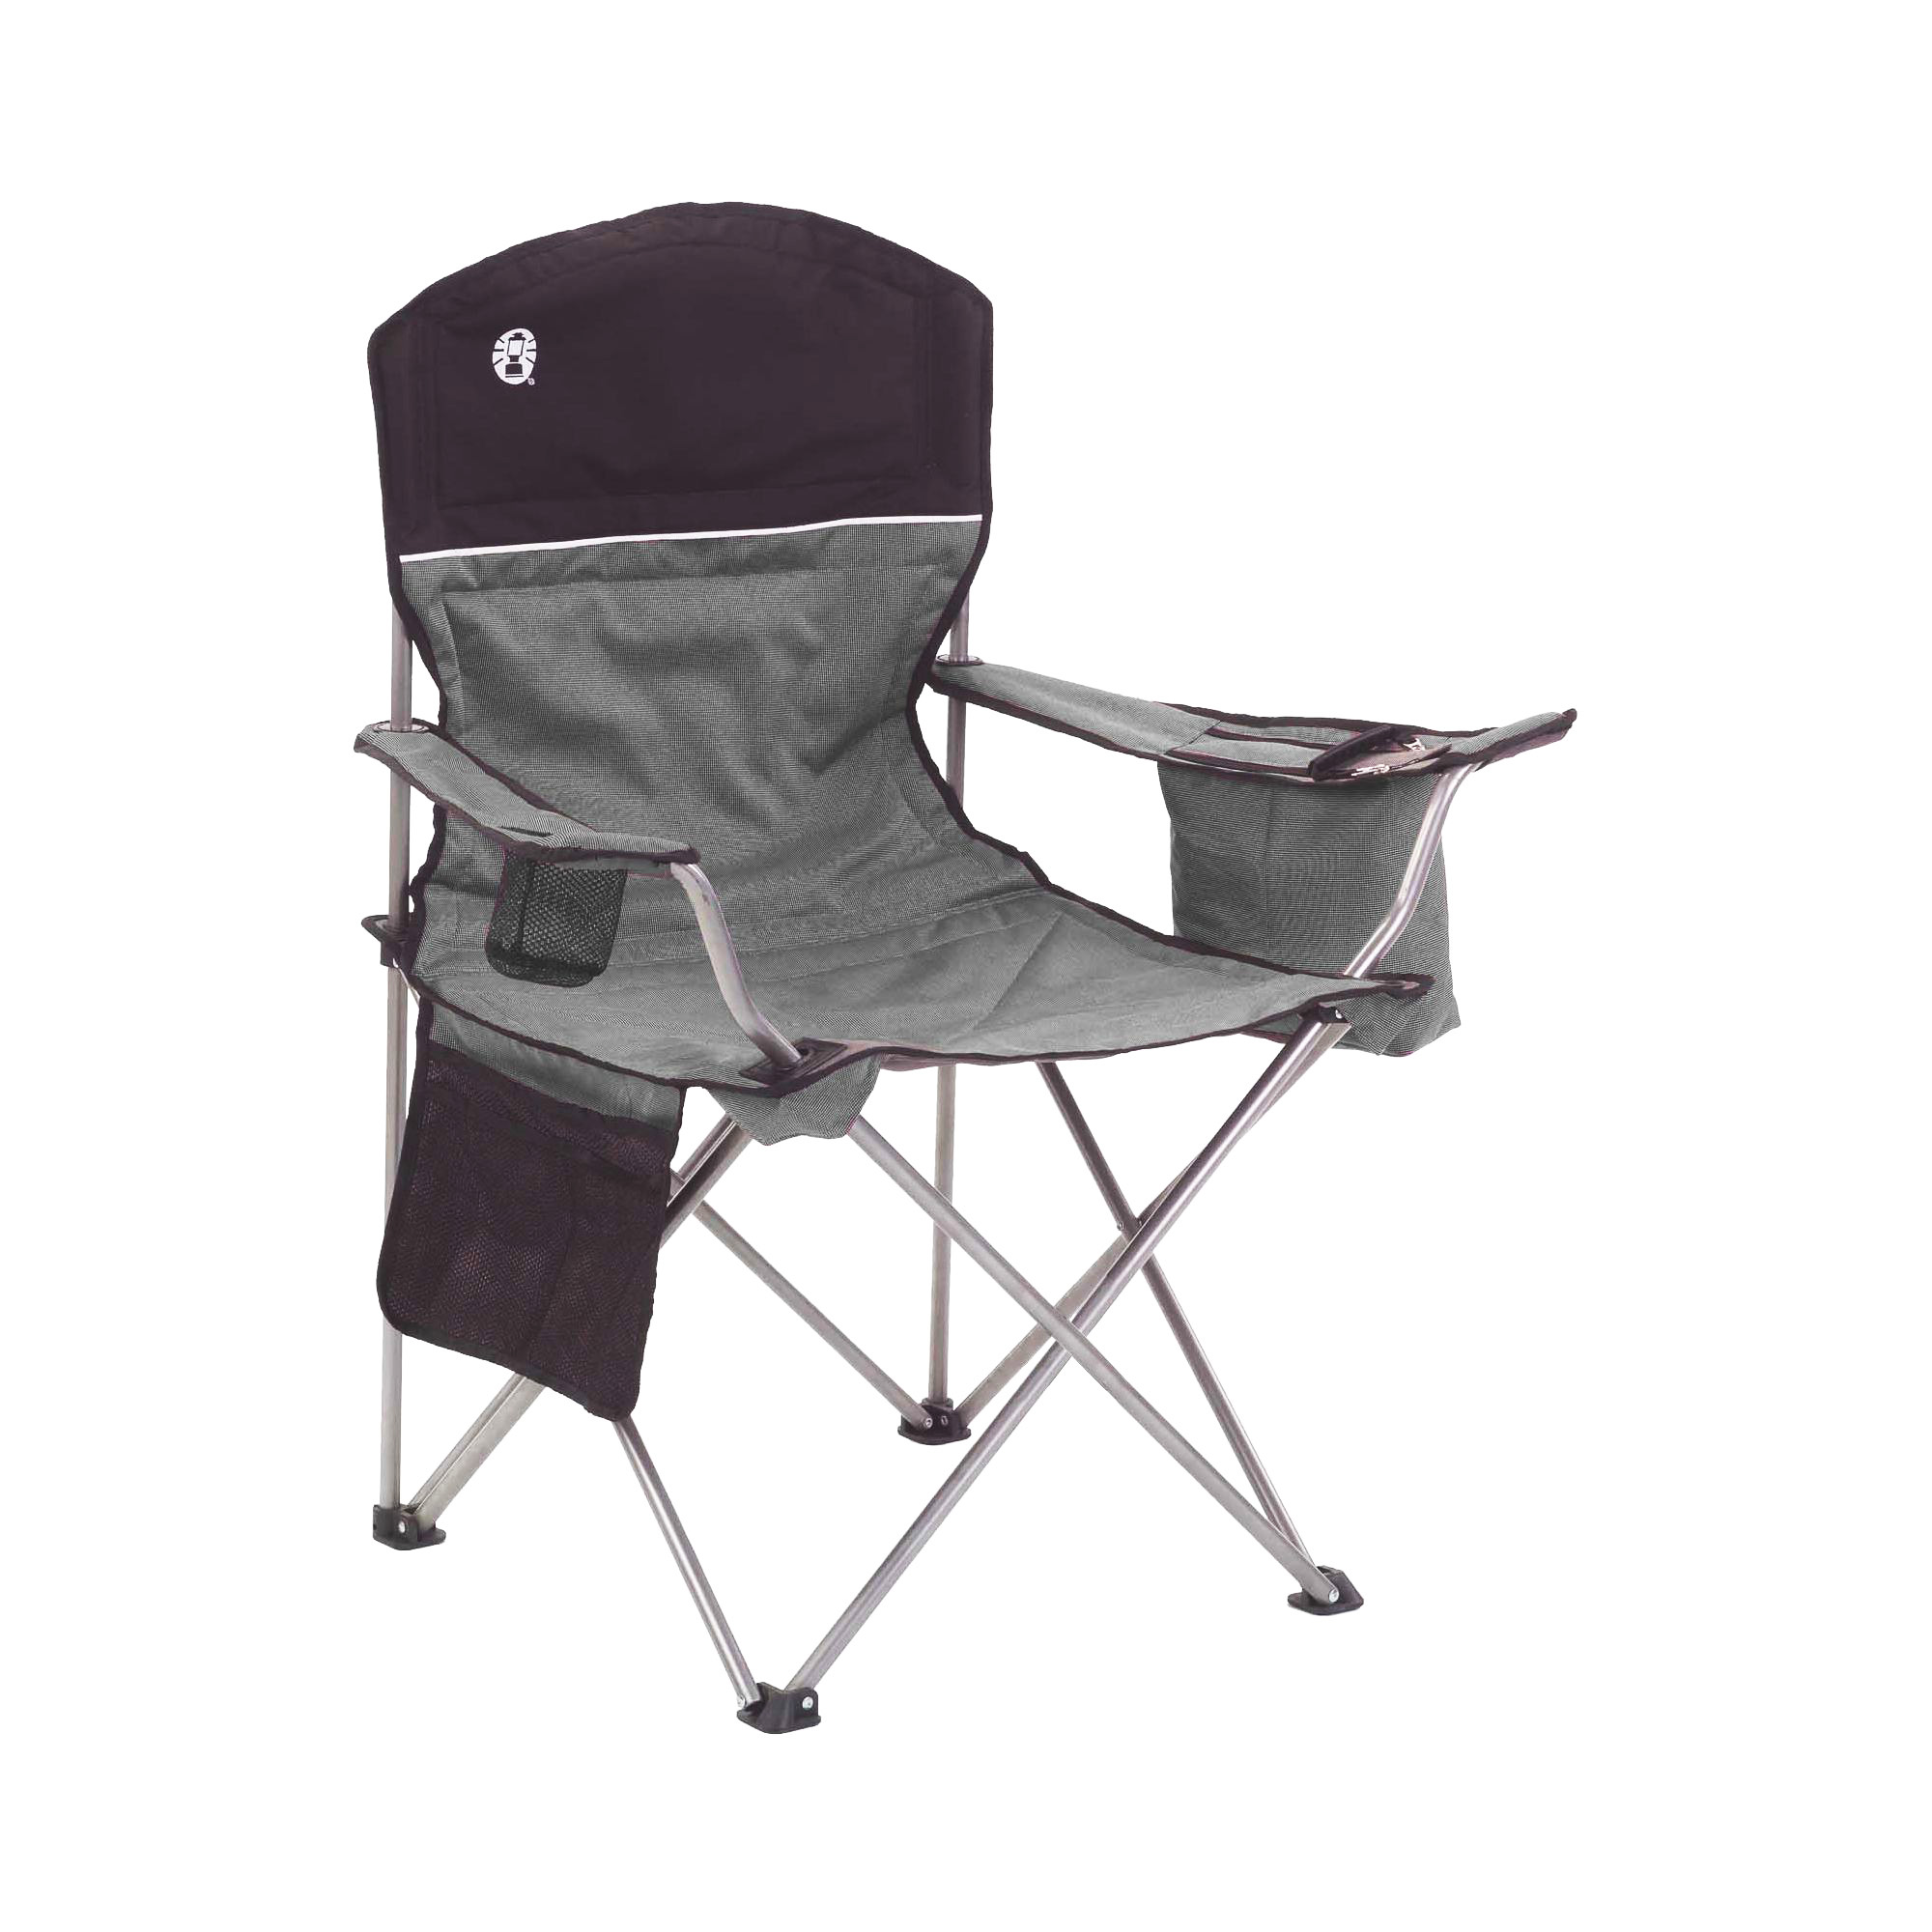 Coleman Oversized Quad Chair with Cooler and Cup Holder, Black/Gray | 2000020256 - image 1 of 7